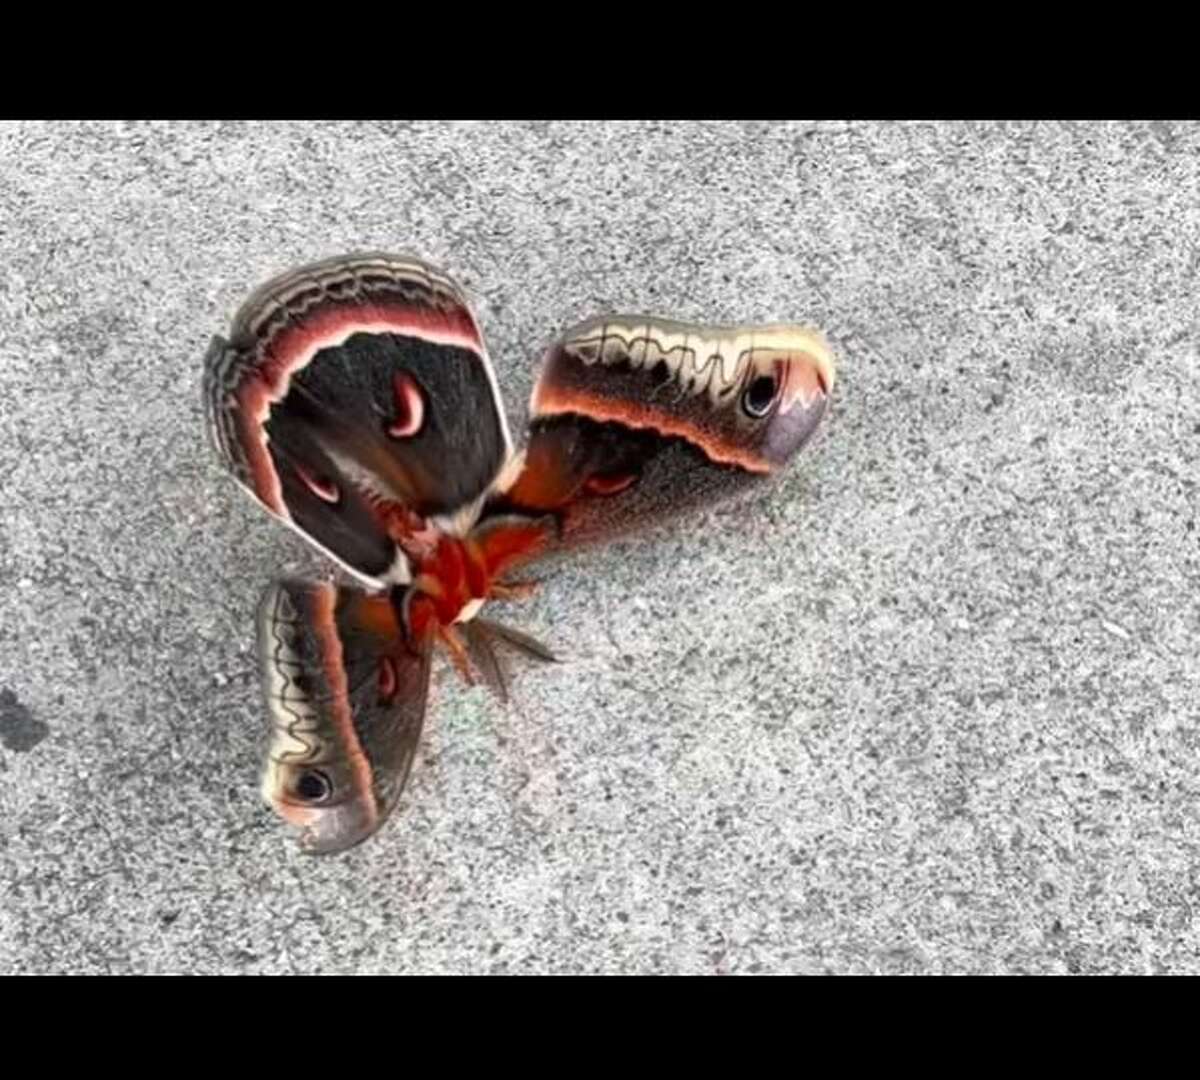 Inks Lake State Park posted on Facebook how staff saw the largest moth in North America, a  Cecropia Moth.